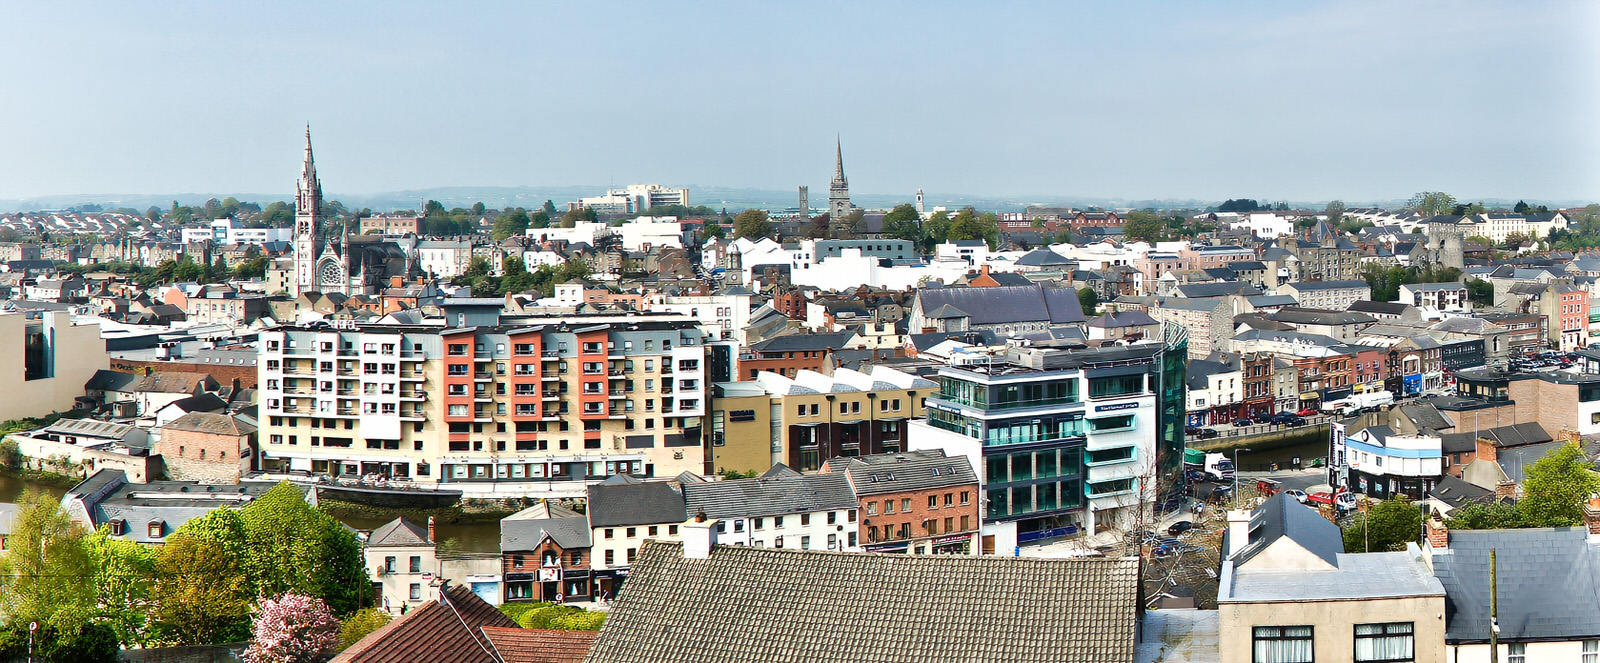 PANORAMIC VIEWS OF DROGHEDA AS IT WAS WAS IN 2011 [PRODUCED USING SONY NEX-5 PANORAMA MODE] 001